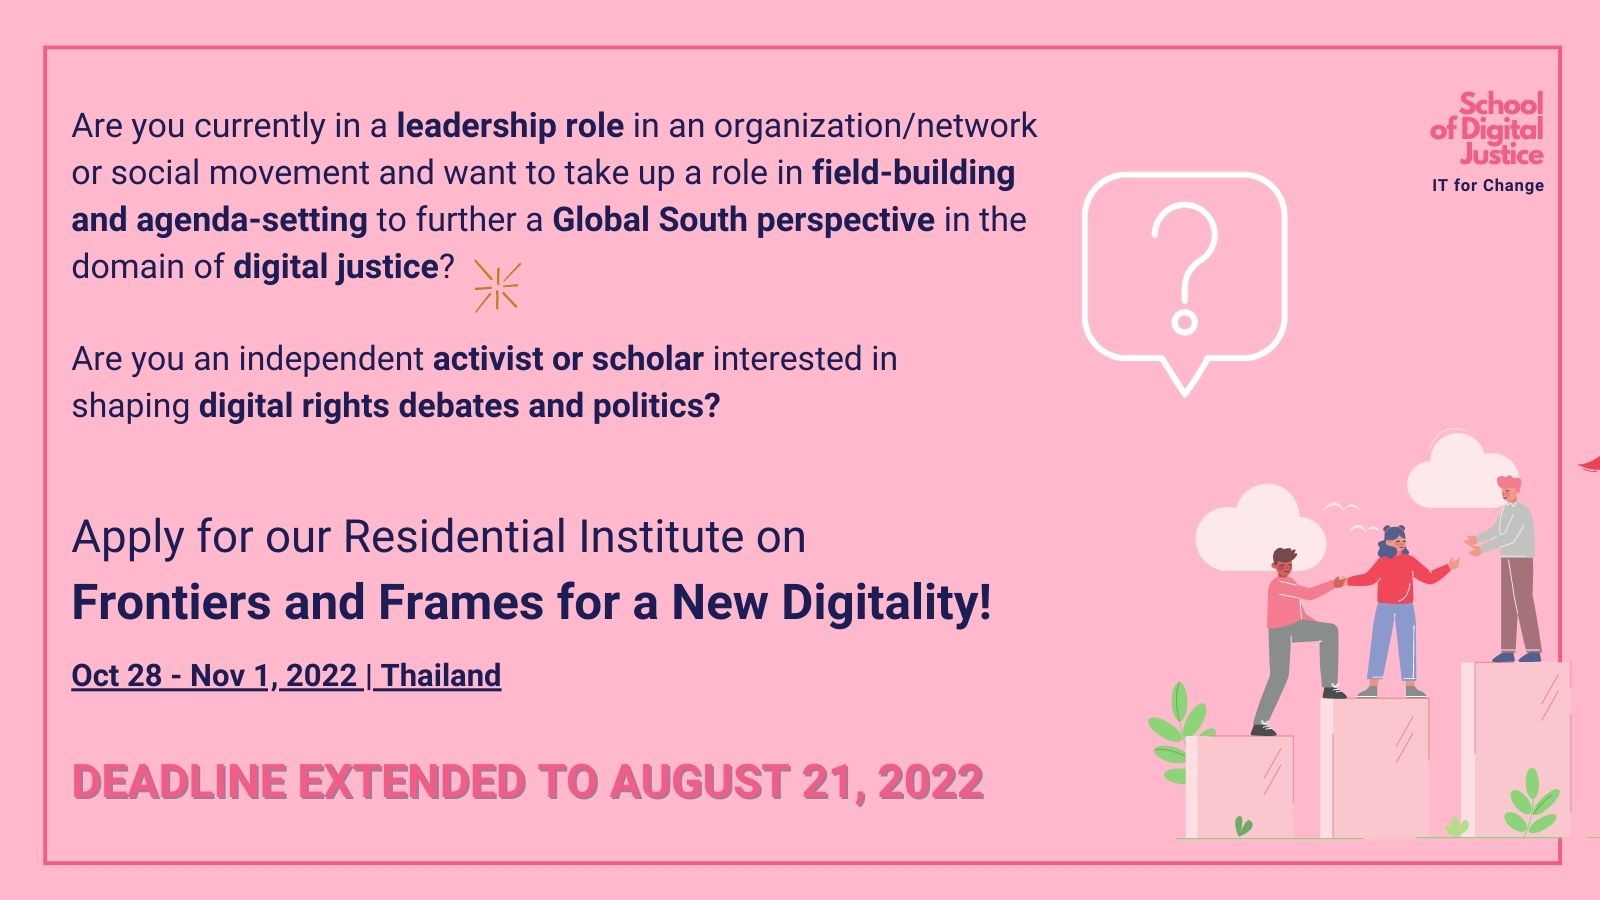 Call for Applications for Residential Institute on Frontiers and Frames for a New Digitality